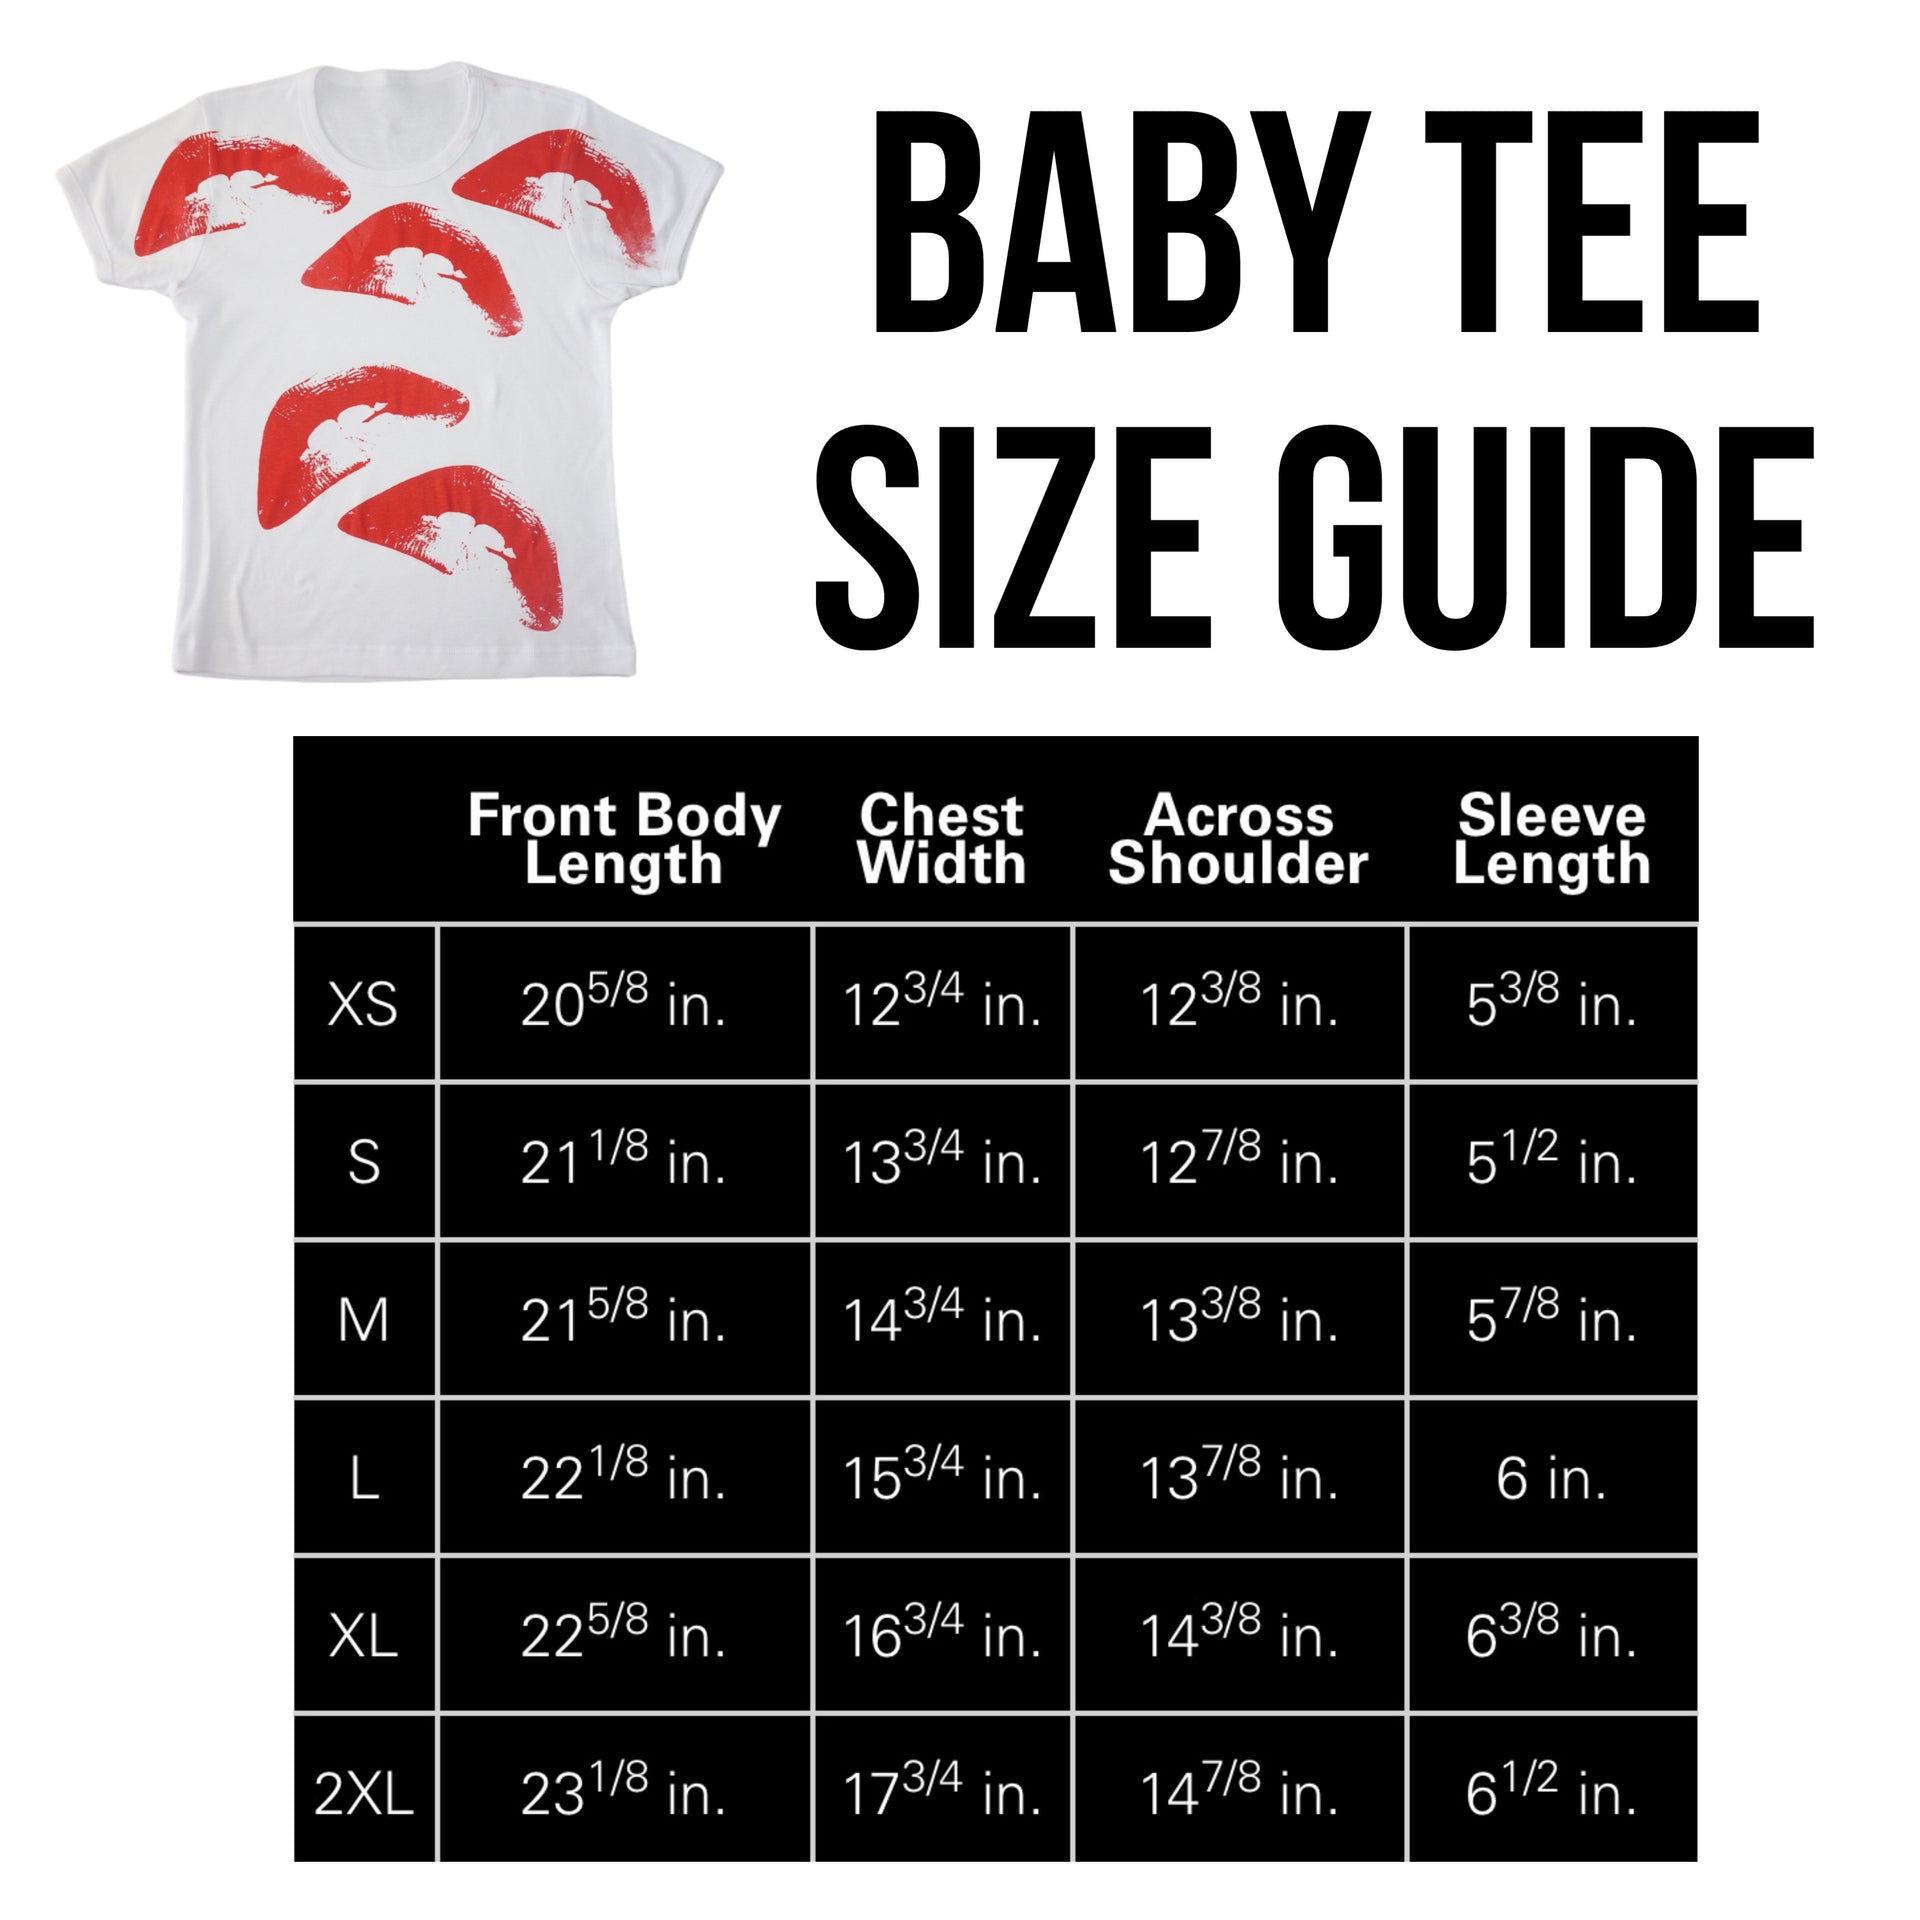 I sometimes worry I wouldn't be such a feminist if I had bigger tits fitted baby tee